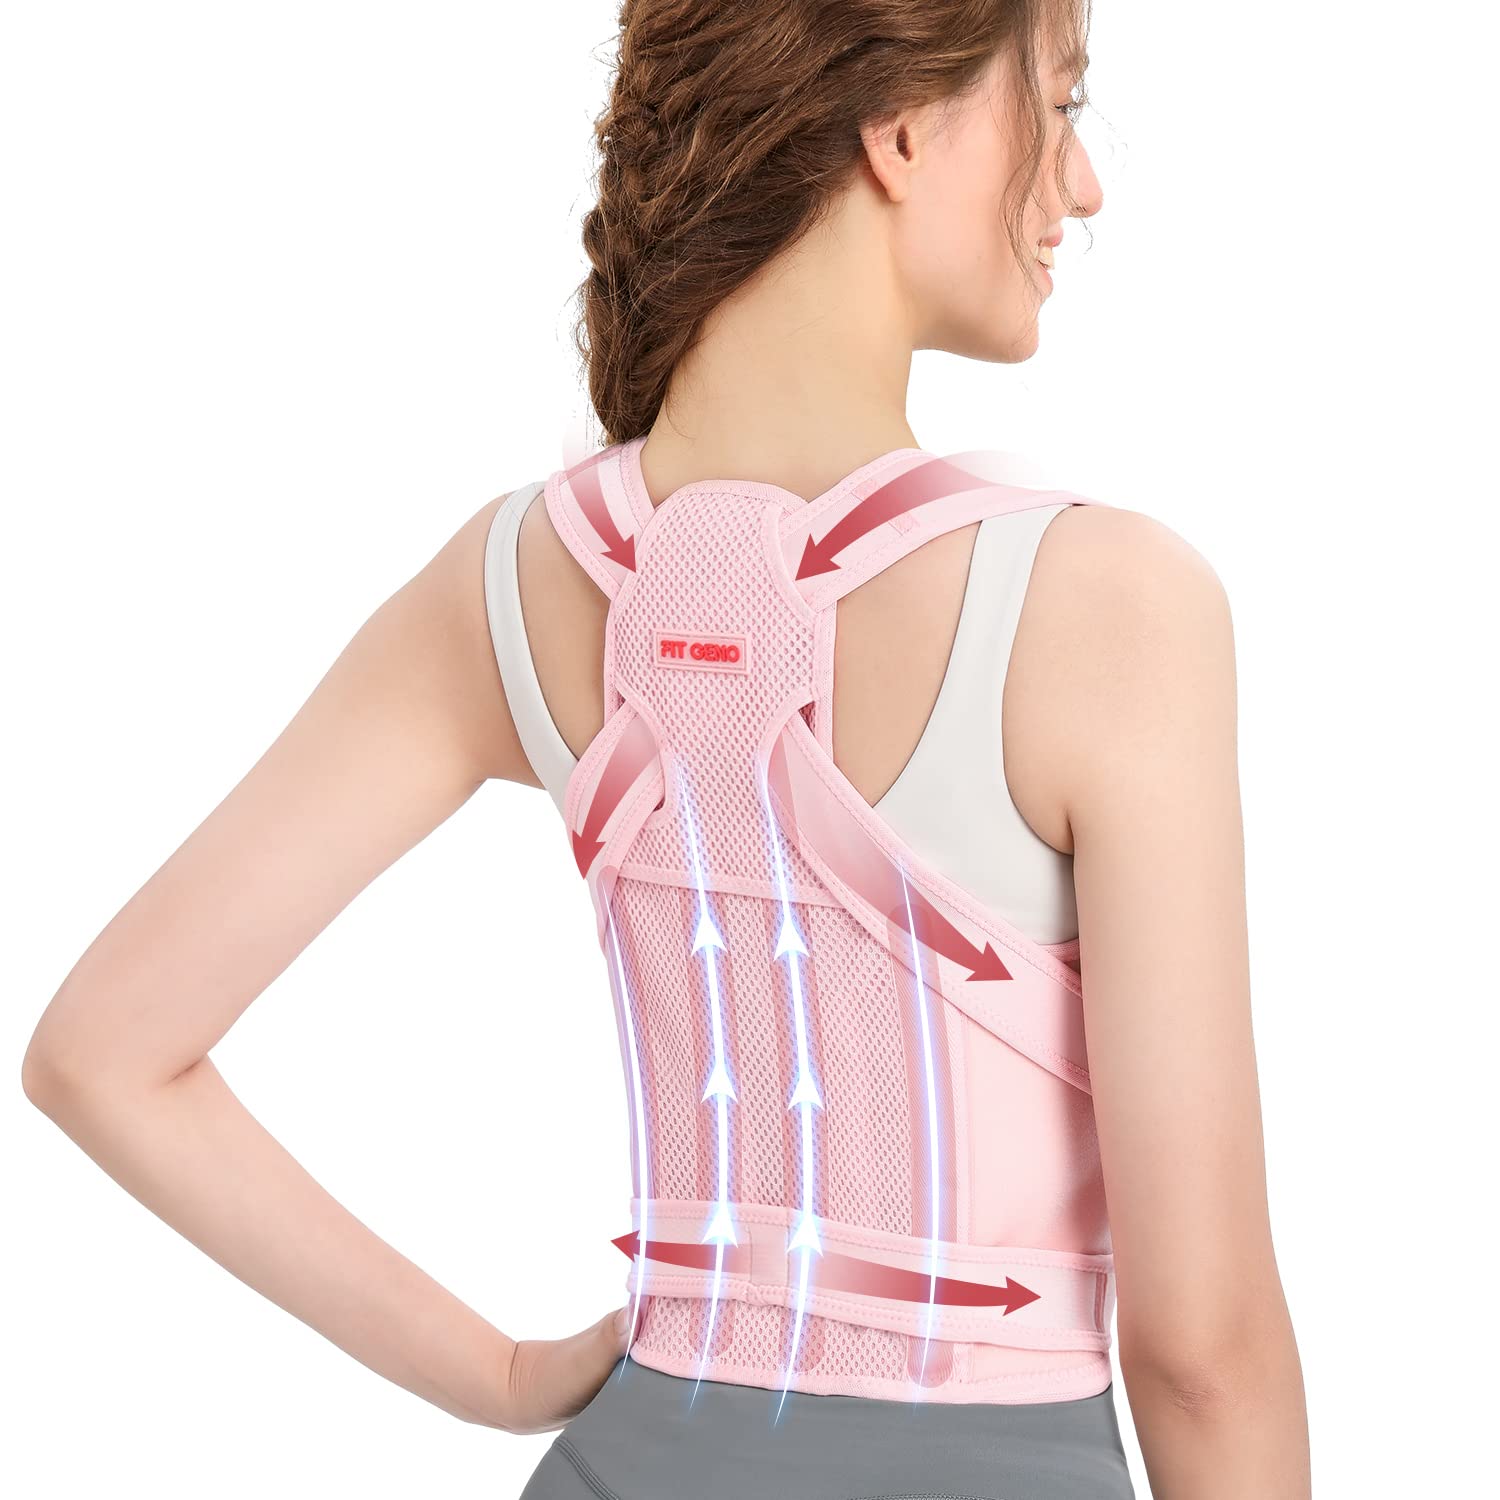 Back Brace and Posture Corrector for Women and Men, Back